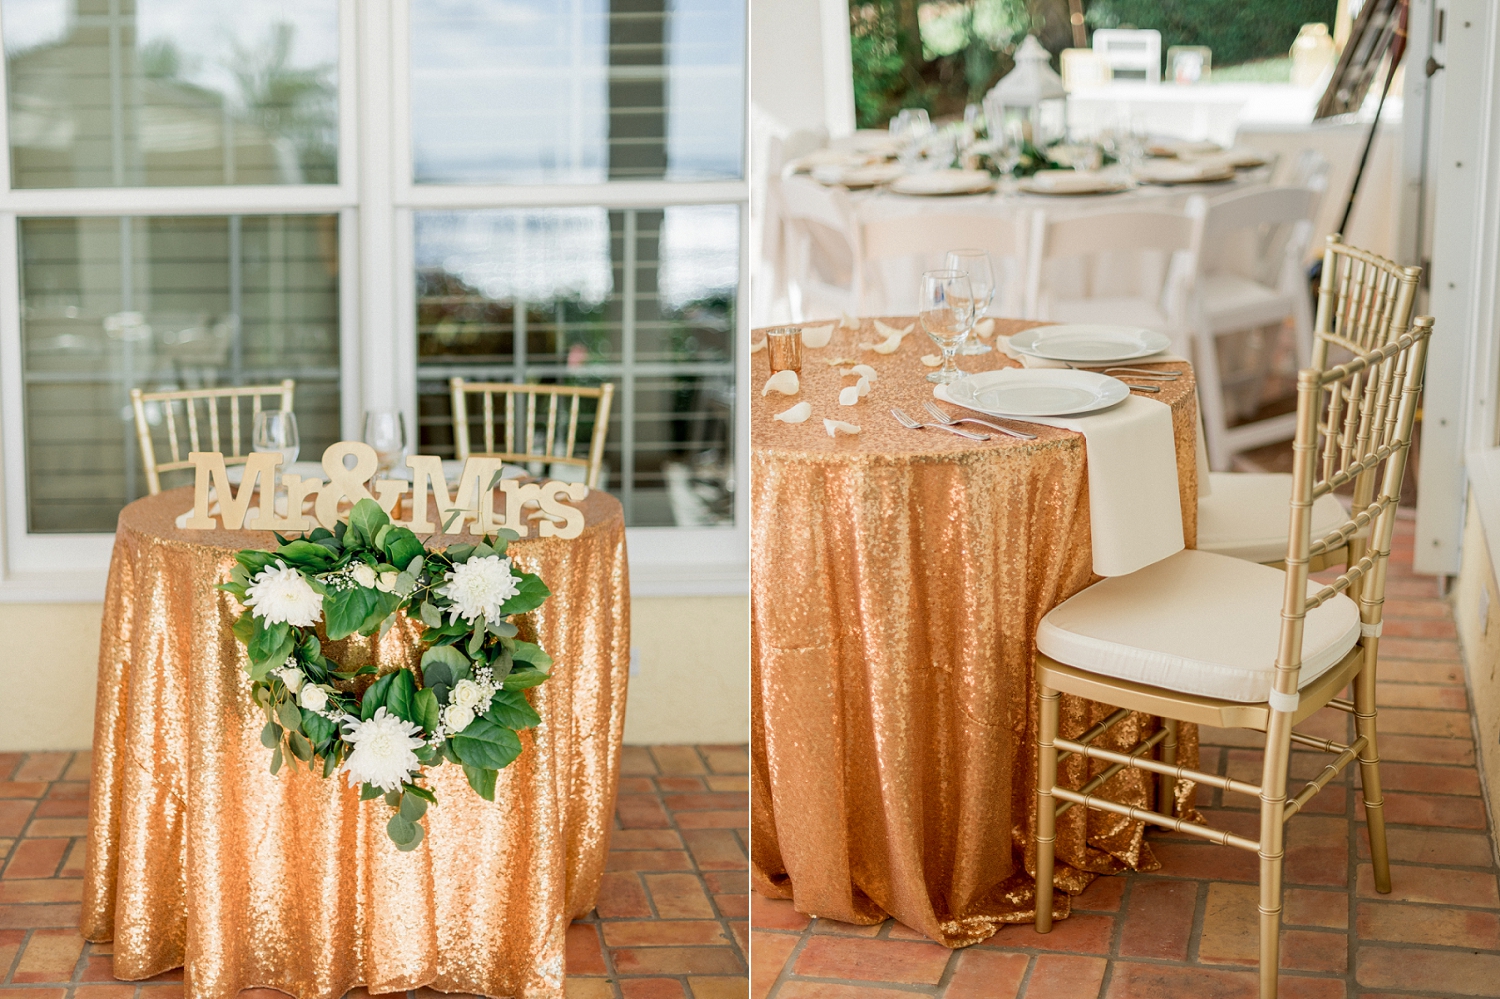 white and gold with greenery wedding reception decor, tropical wedding ideas, tropical wedding reception, sweethearts table